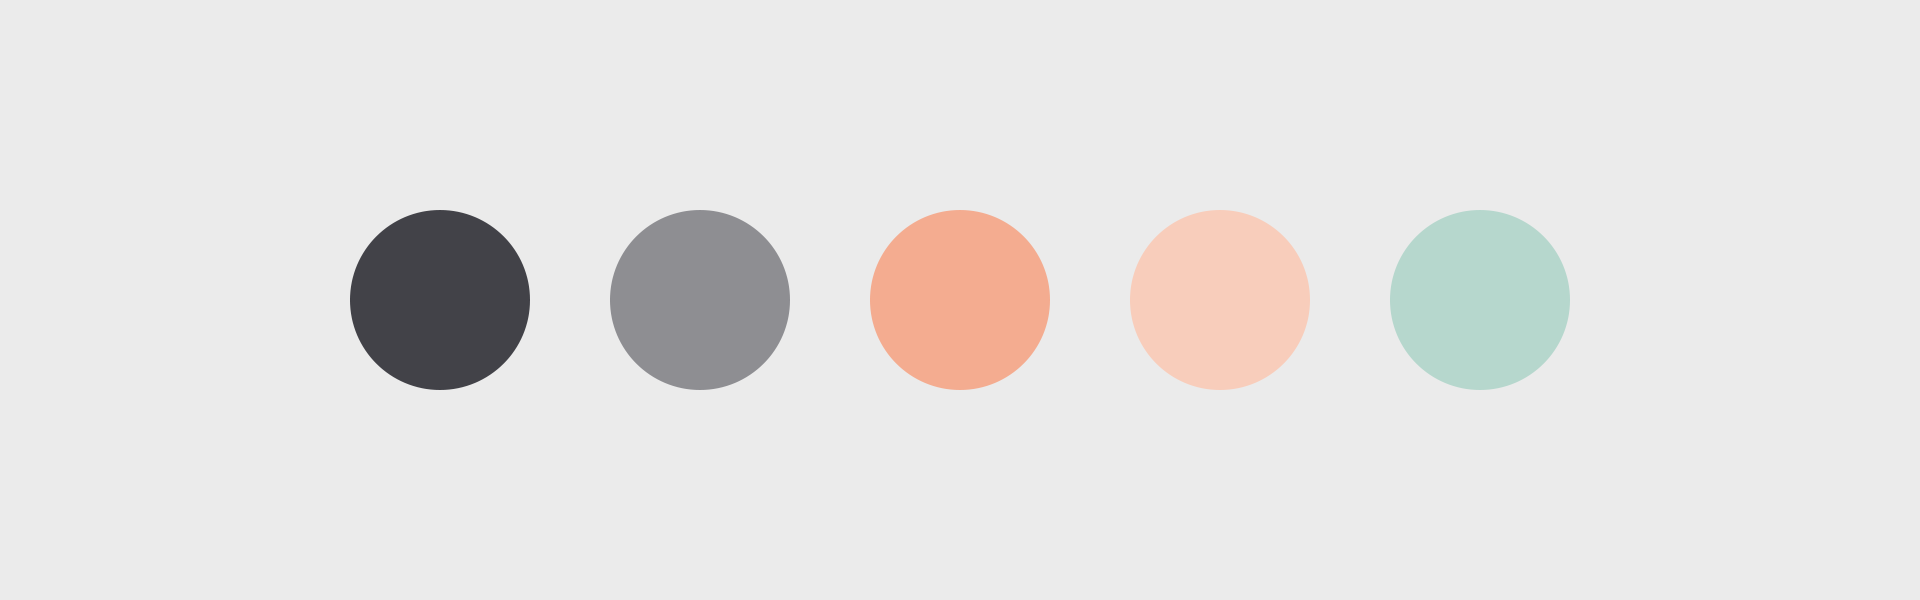 helene-chataigner-pm-identity-color-palette